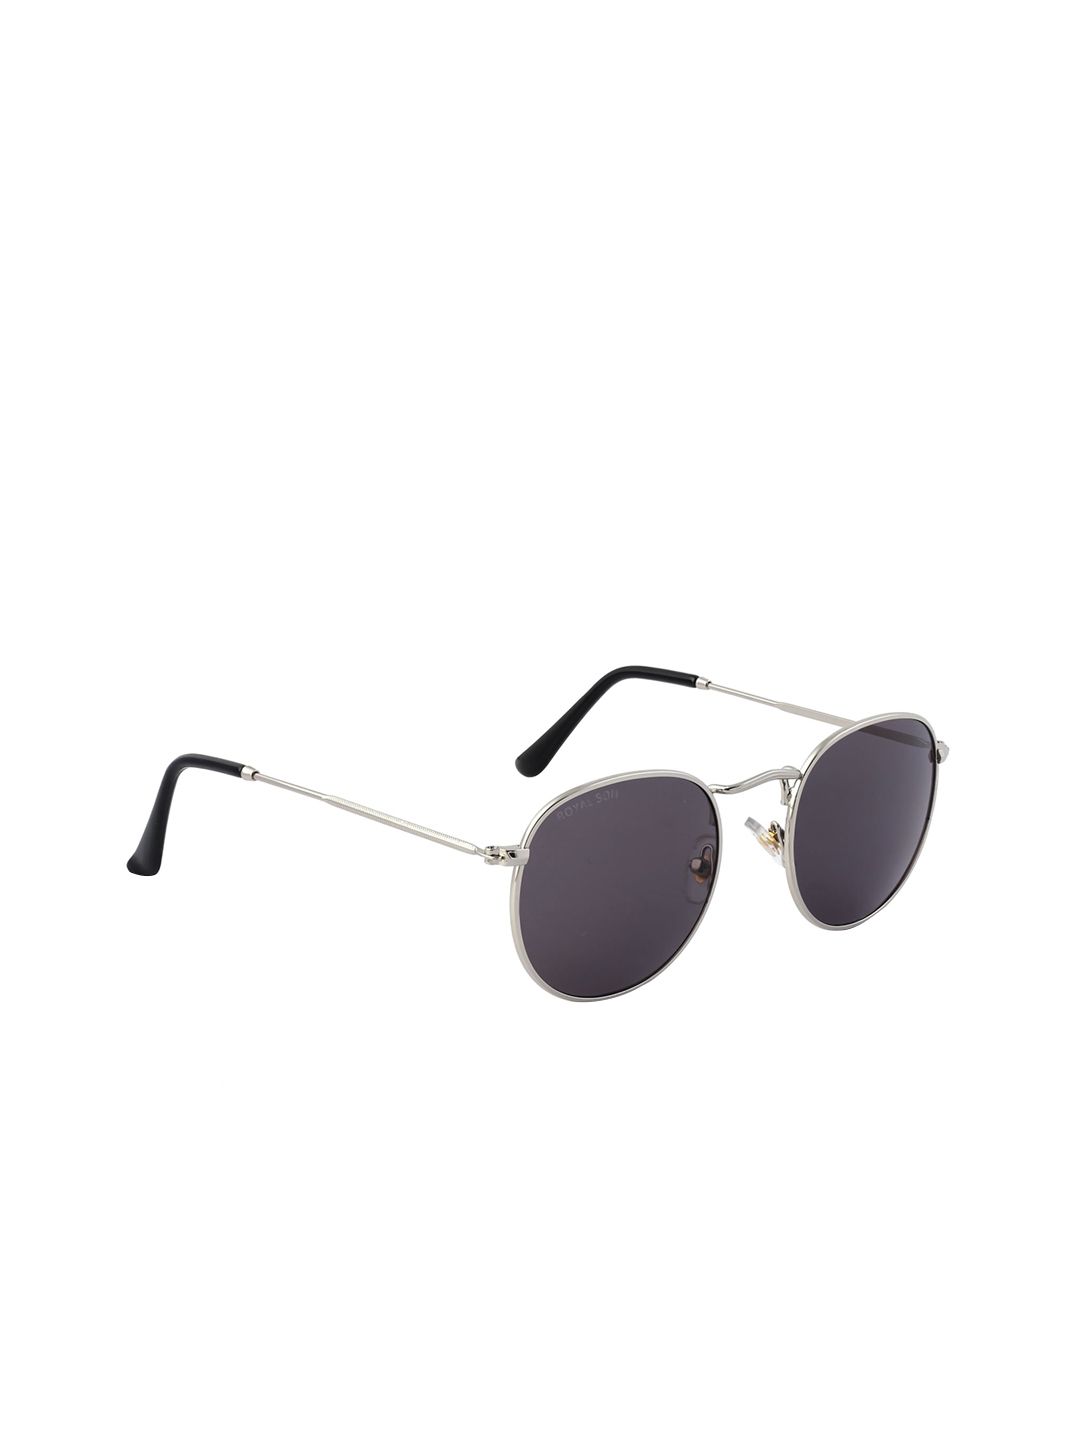 ROYAL SON Unisex Round Sunglasses RS0013RD Price in India